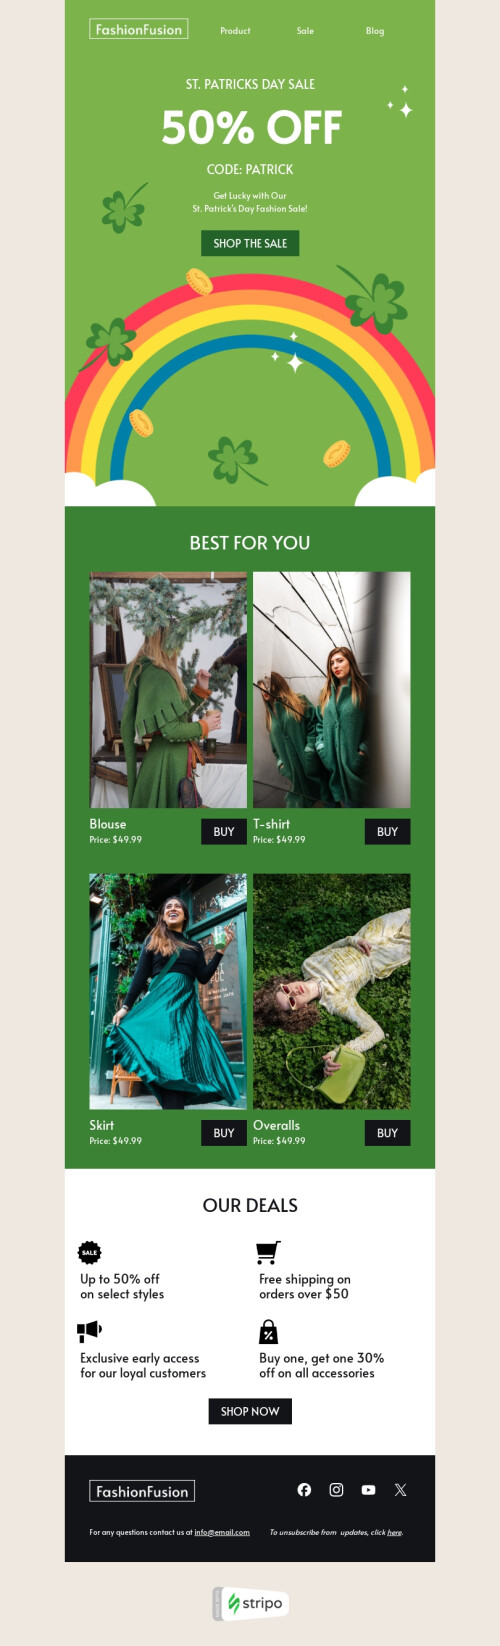 St. Patrick's Day email template "Get lucky" for fashion industry mobile view